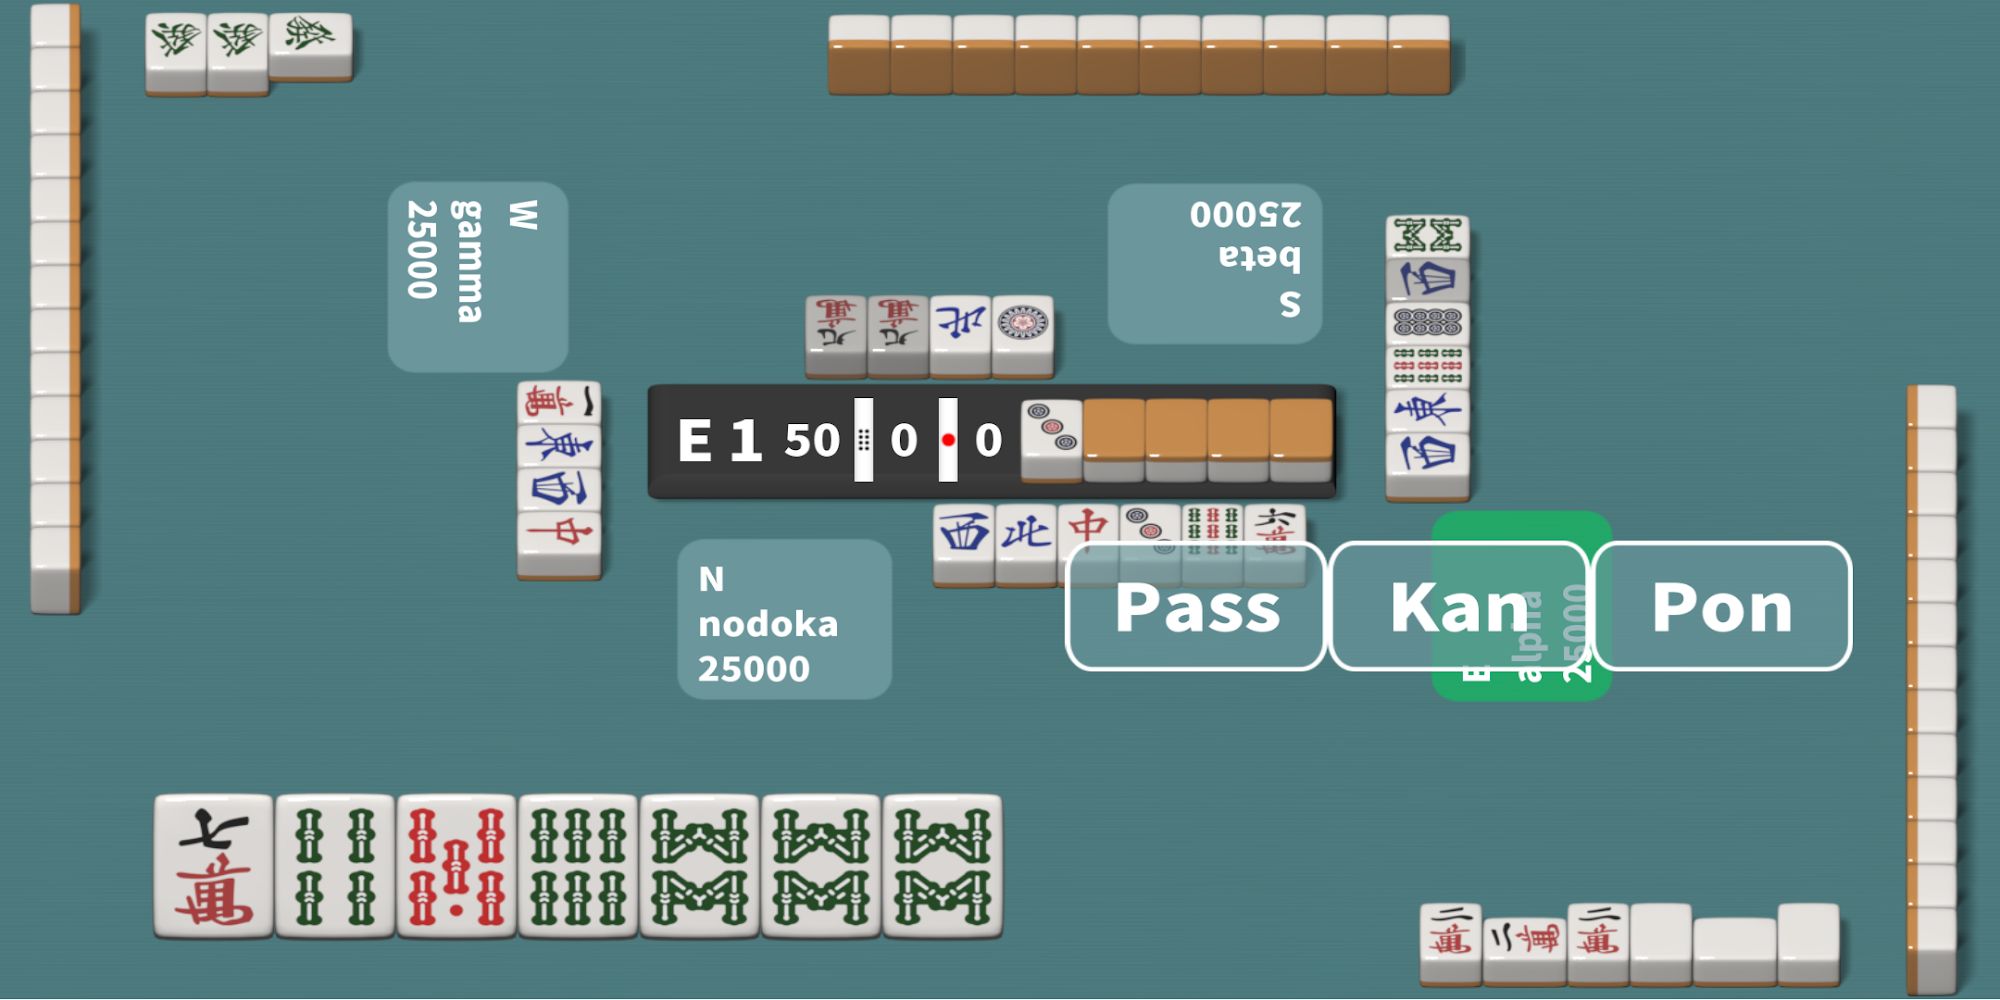 Full version of Android Board game apk R Mahjong - Riichi Mahjong for tablet and phone.